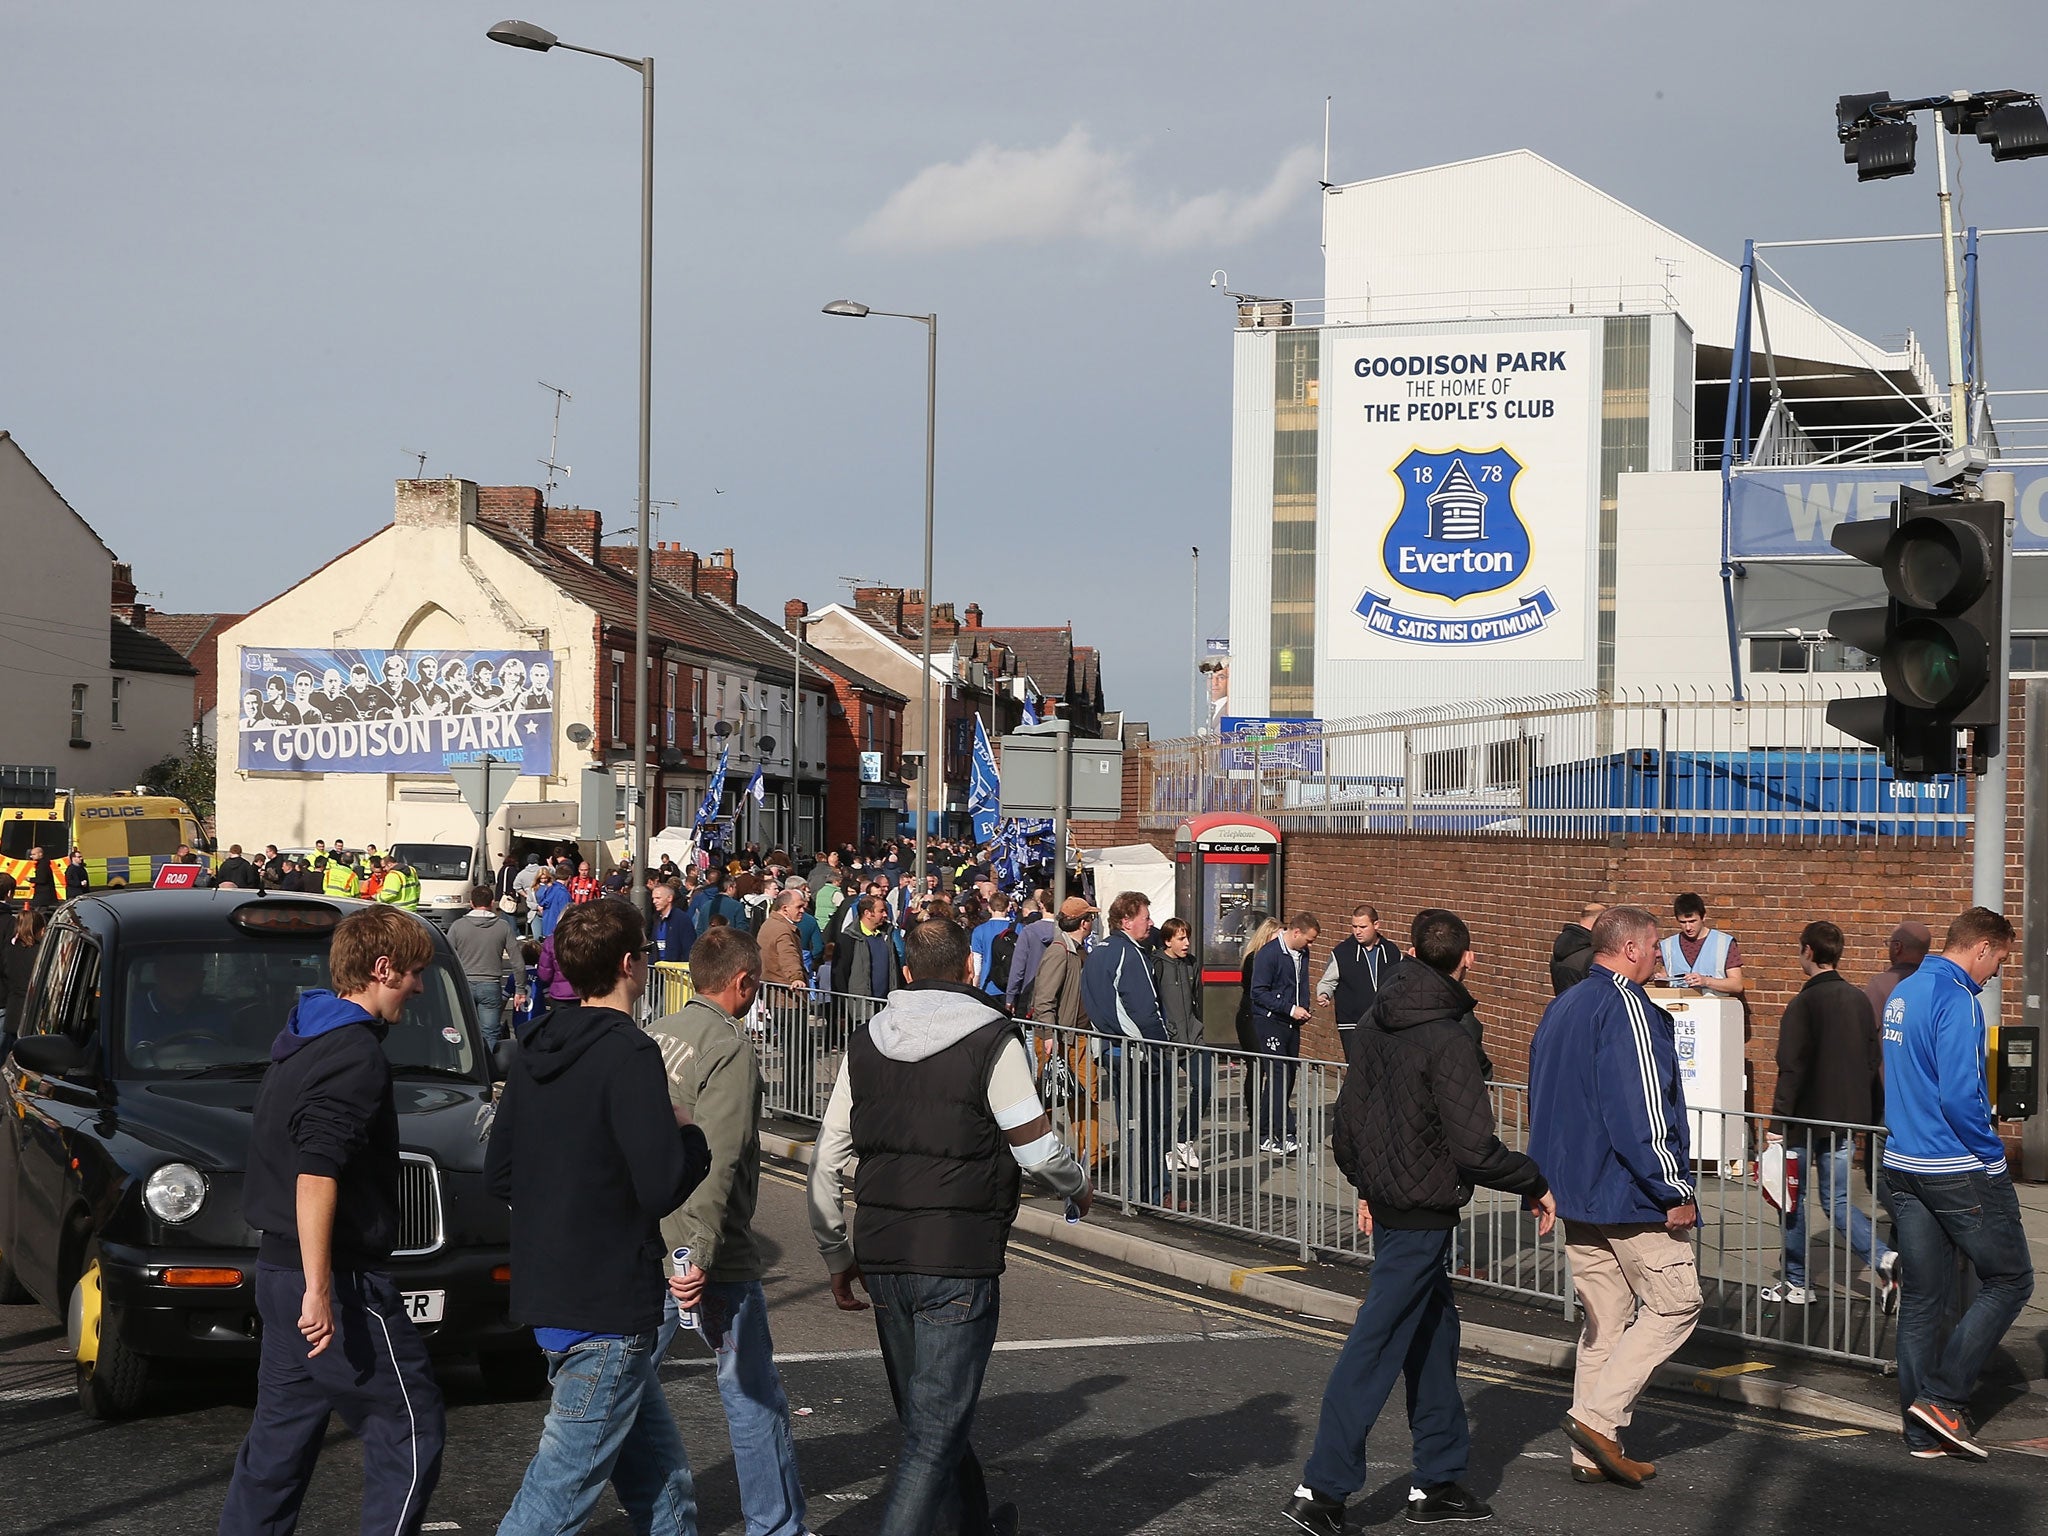 Everton are unable to expand Goodison Park beyond its current 40,000 capacity and in 2009 failed in their attempts to build a new stadium